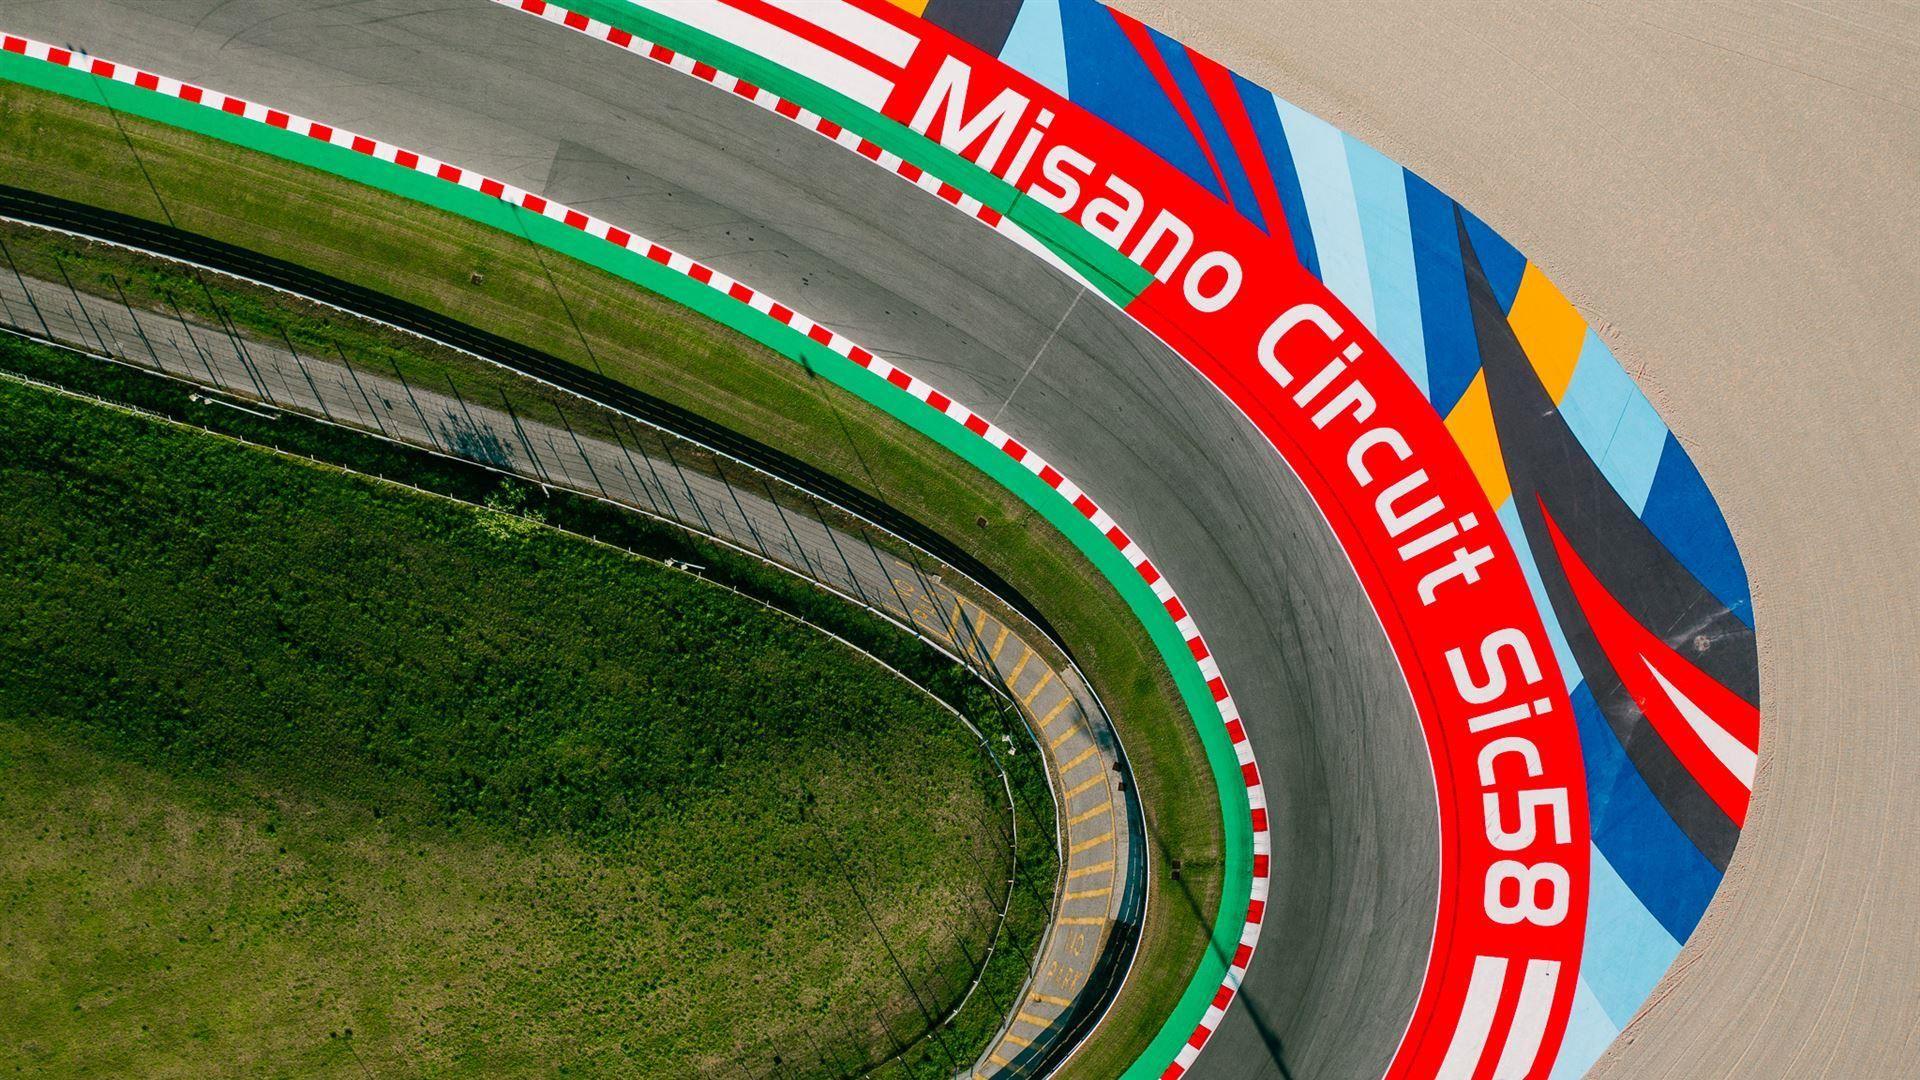 Misano World Circuit Marco Simoncelli in Italy, Europe | Racing,Motorcycles - Rated 8.2